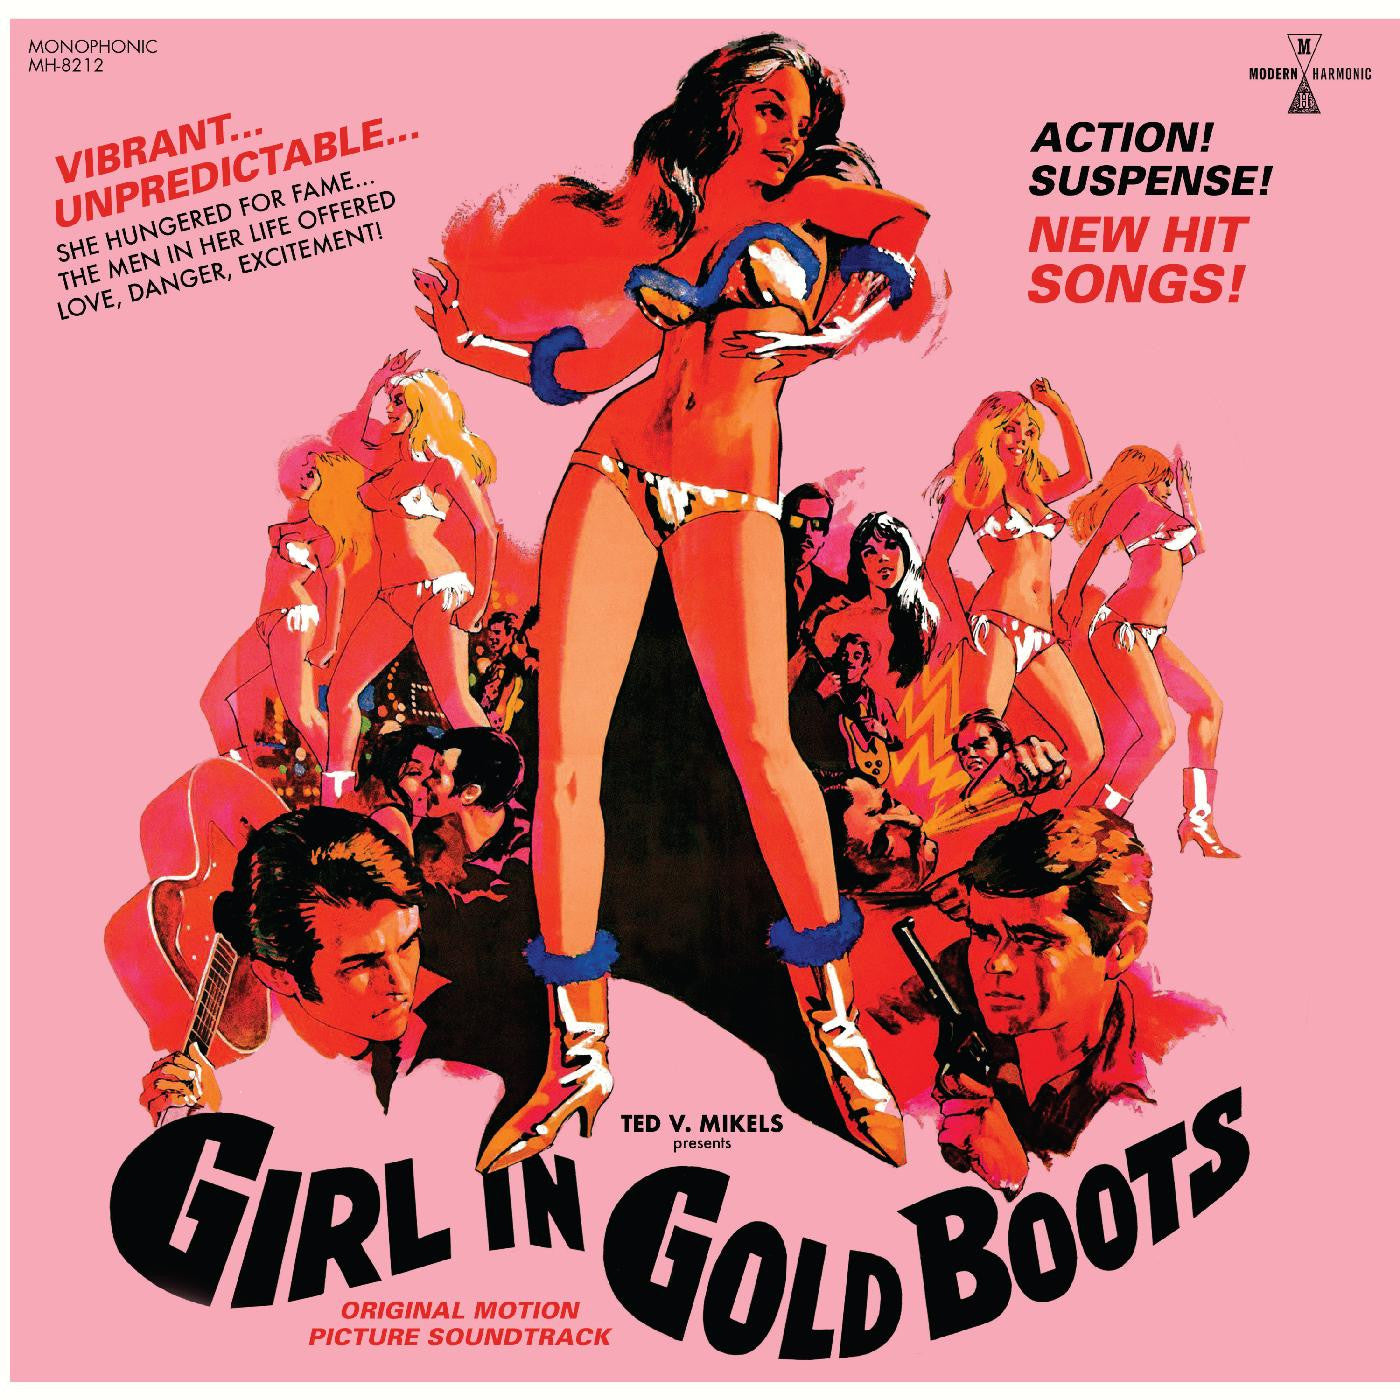 Girl In Gold Boots - Original Motion Picture Soundtrack - LP